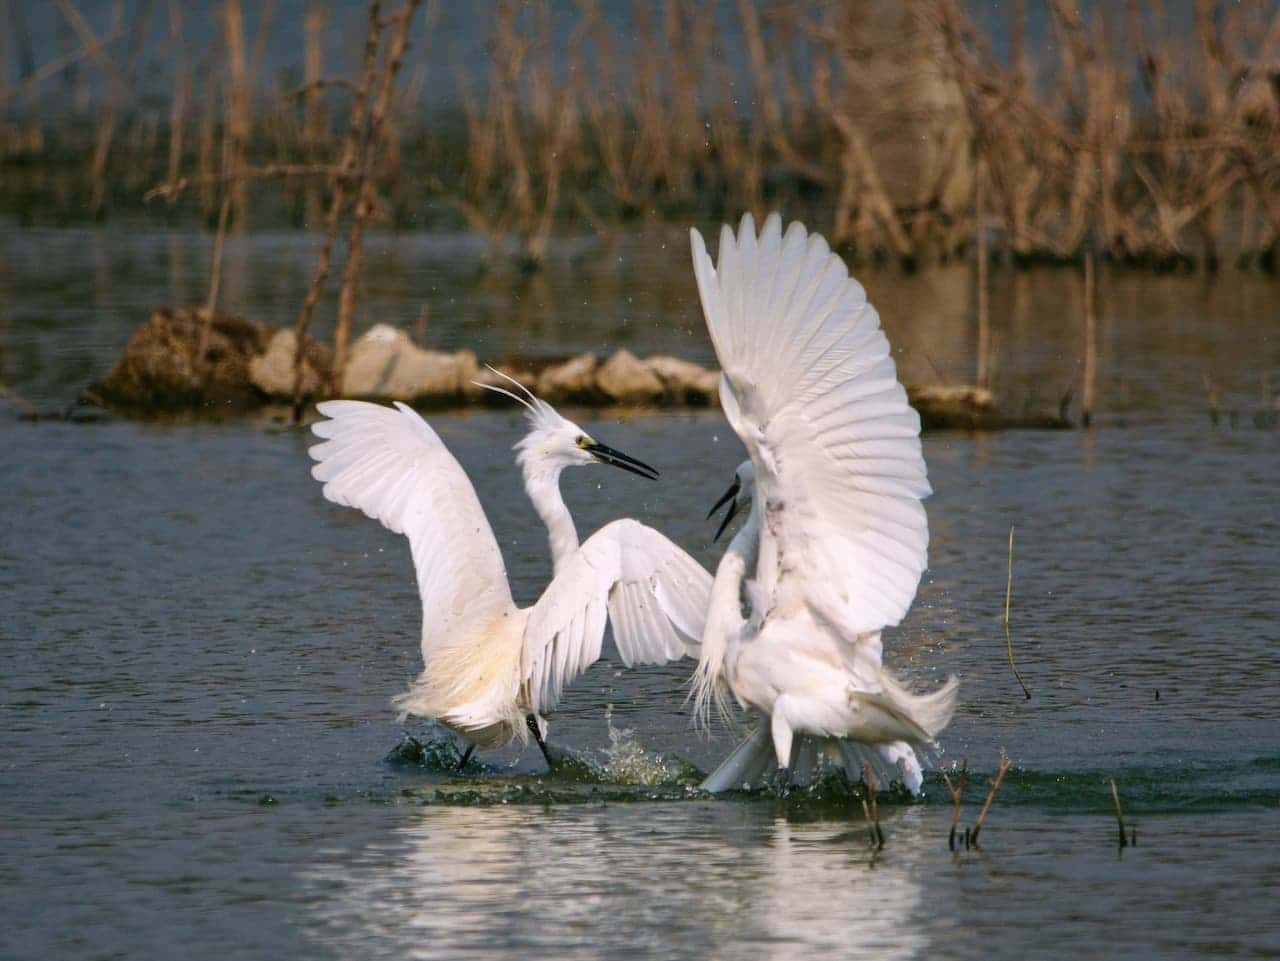 Two Great Egrets Fighting Each Other